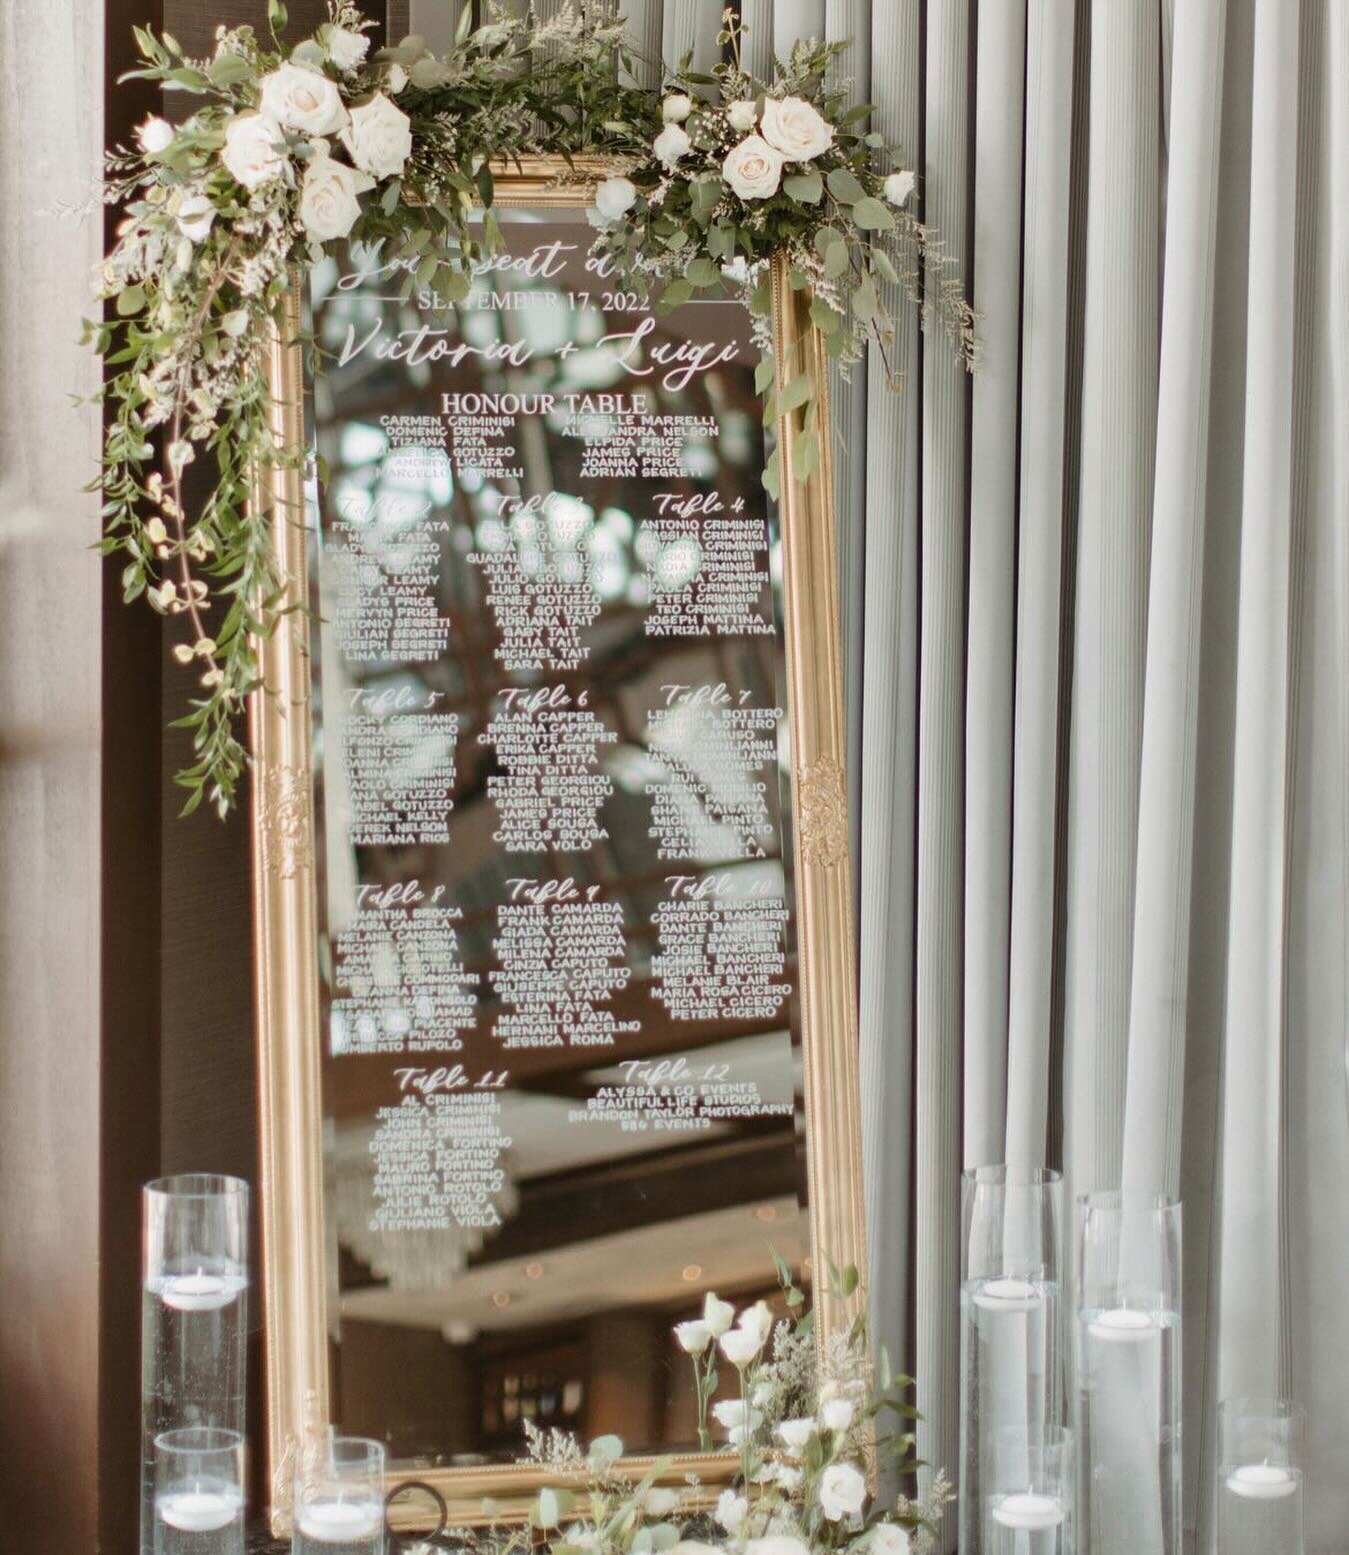 There&rsquo;s nothing quite like a classic romantic seating chart to set the mood for your wedding 💫 

Shoutout to: 
Bride @victoriaeprice @beautyby_vic 
Venue @wbgolfclub 
Florals @flowerzdesign
Photography @brandontaylor23
Coordinator @eventshoppe